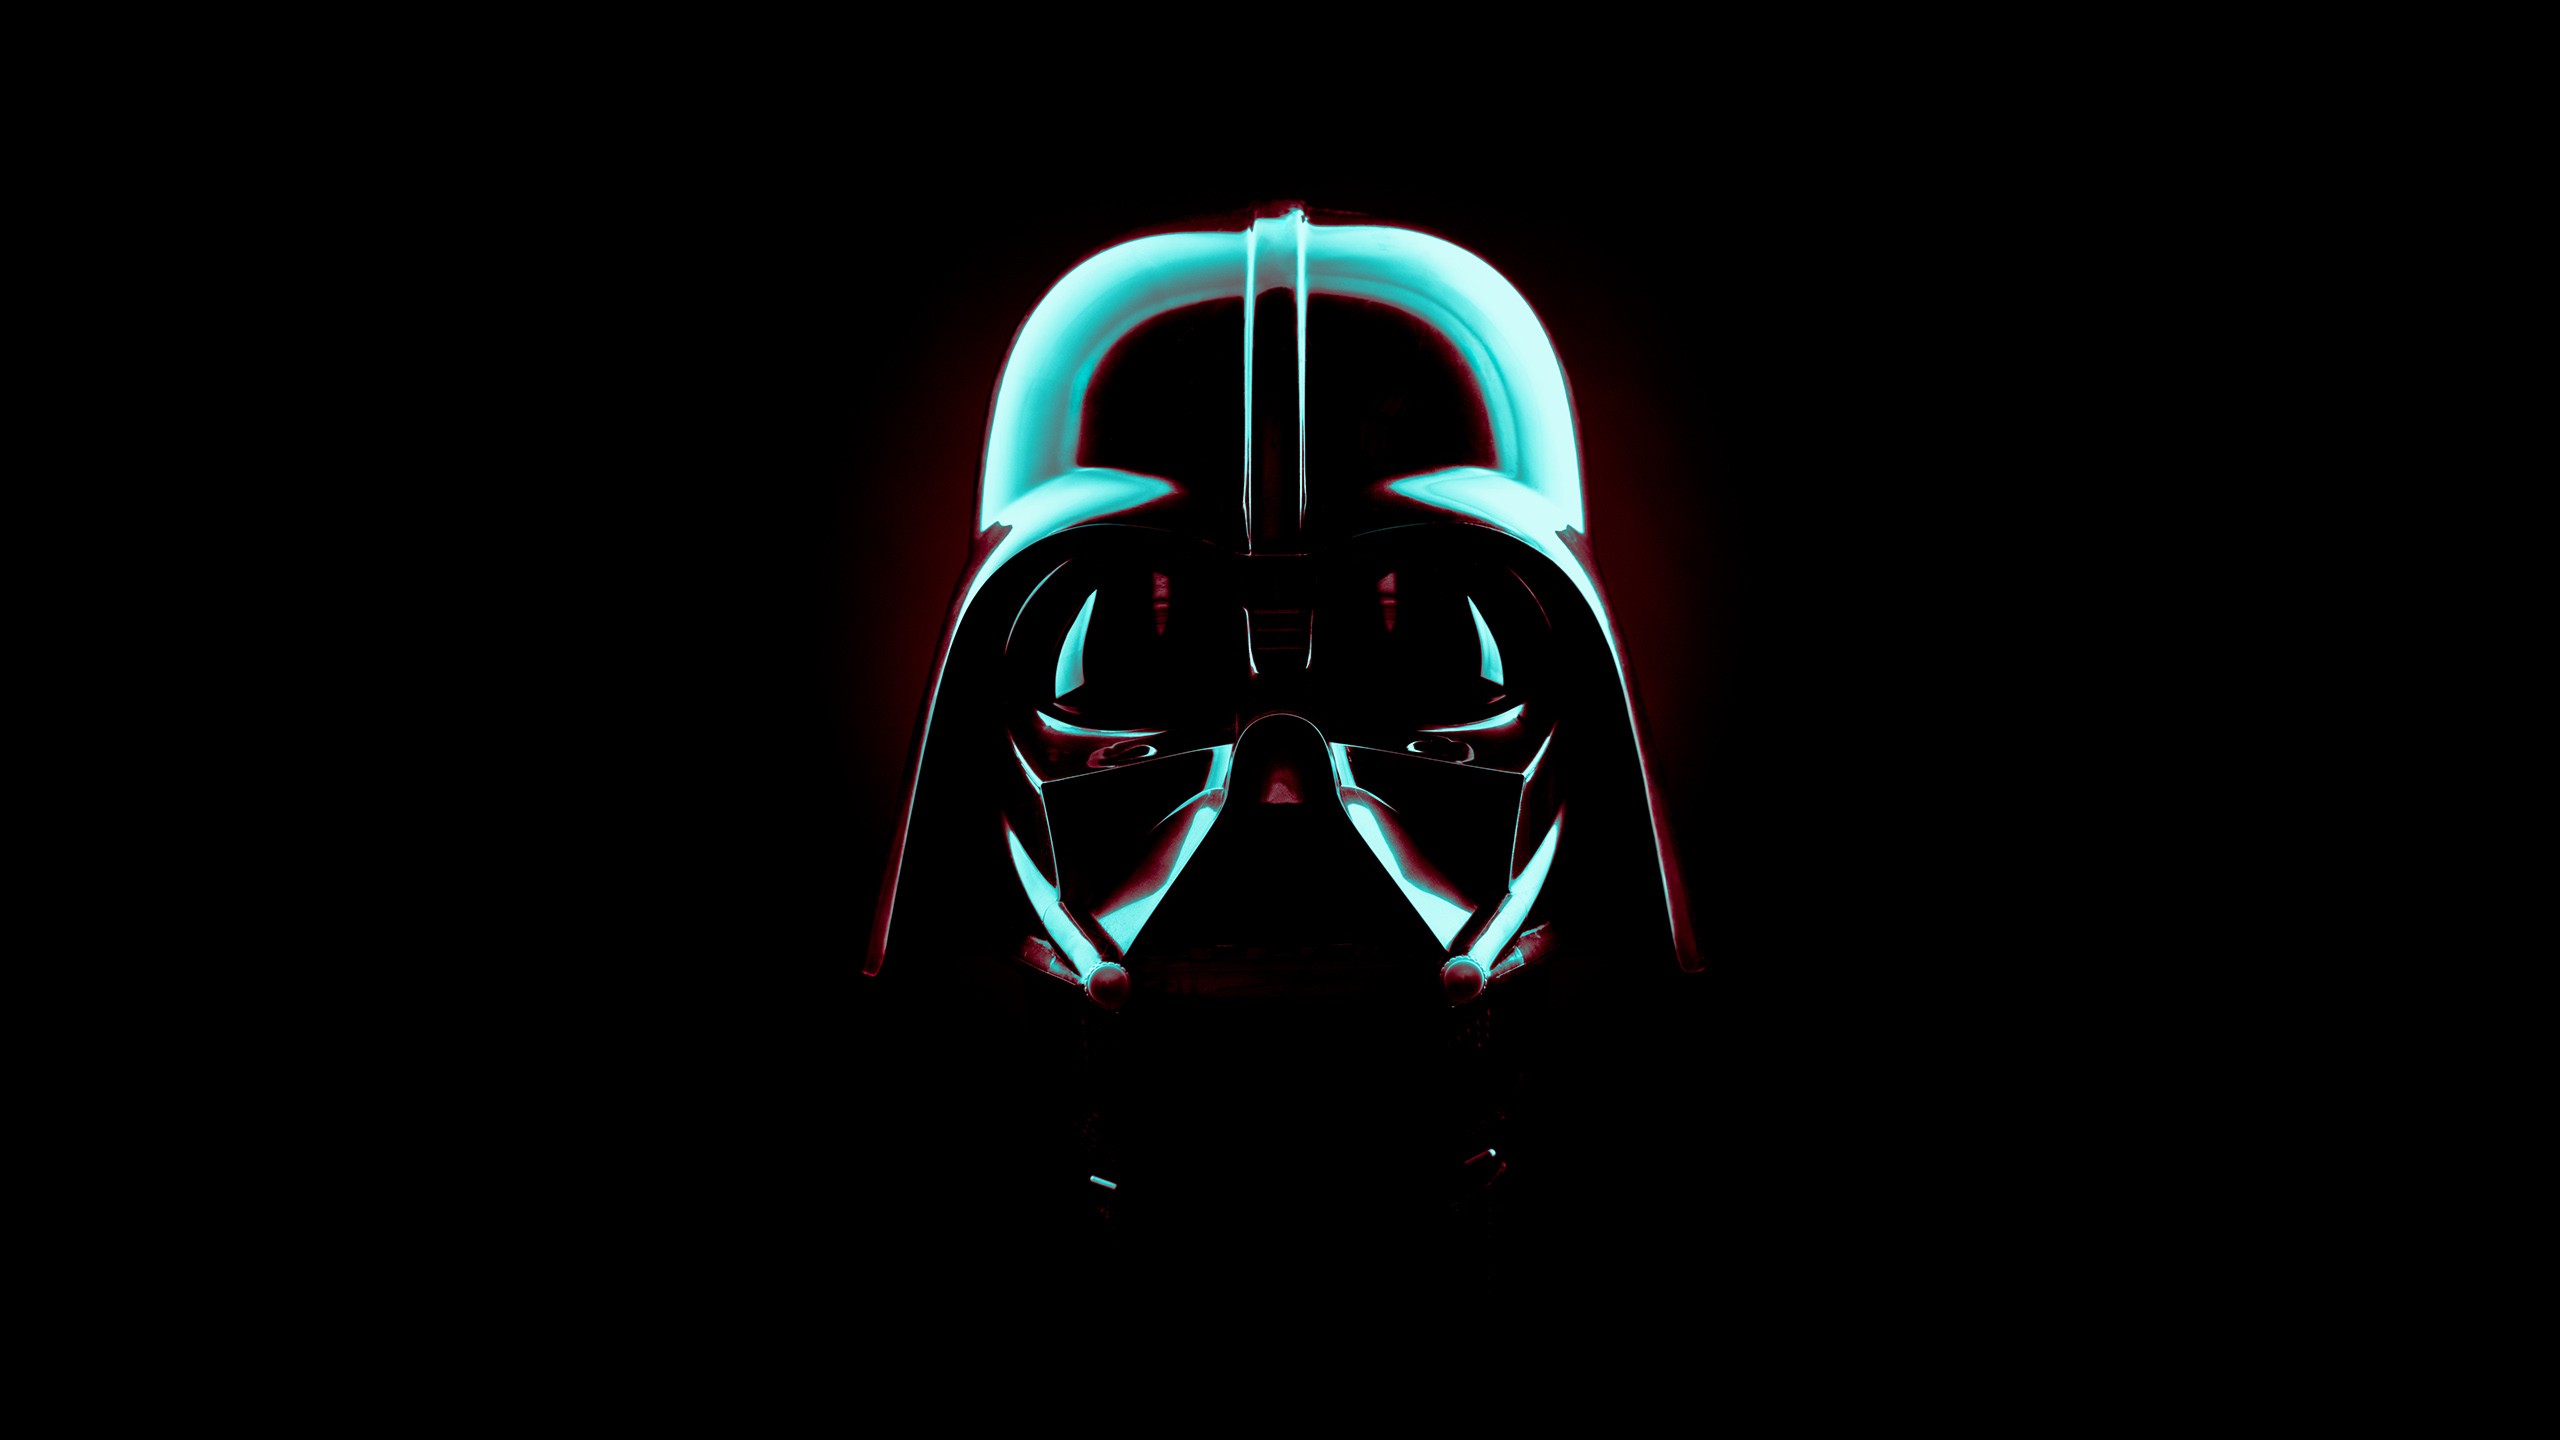 I had an idea to combine apple wallpapers with a star wars twist So  heres my take on it  rStarWars